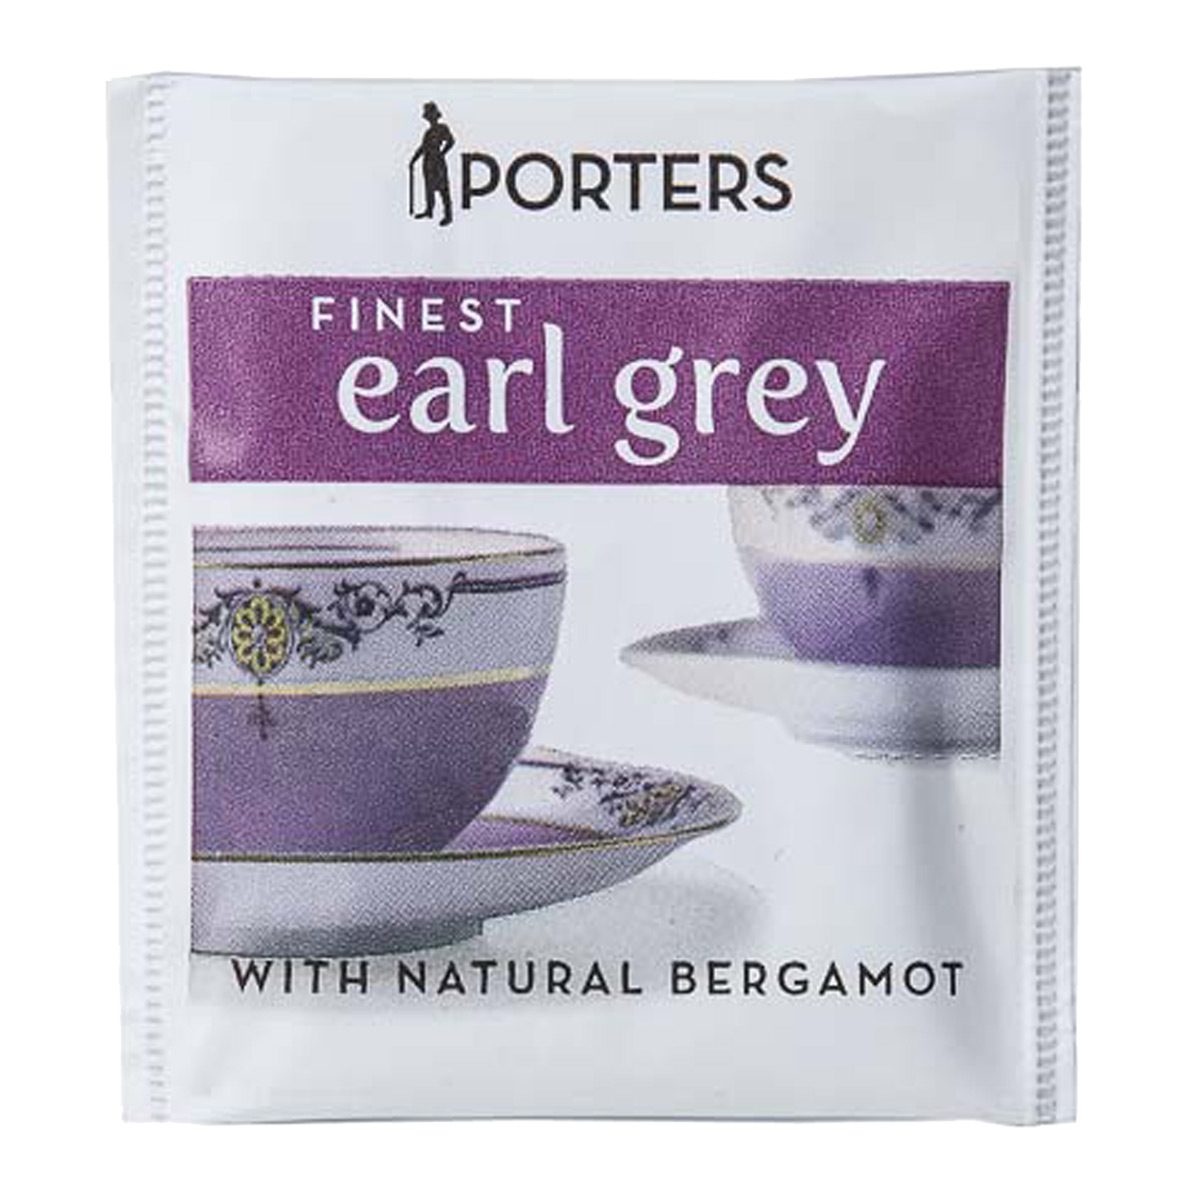 consumables-hospitality-beverage-food-porter-earl—grey-teabags-x200-bags-blend-fine-black-china-whole-leaf-tea-natural-oil-bergamot-with-or-without-milk-vjs-distributors-HPTE